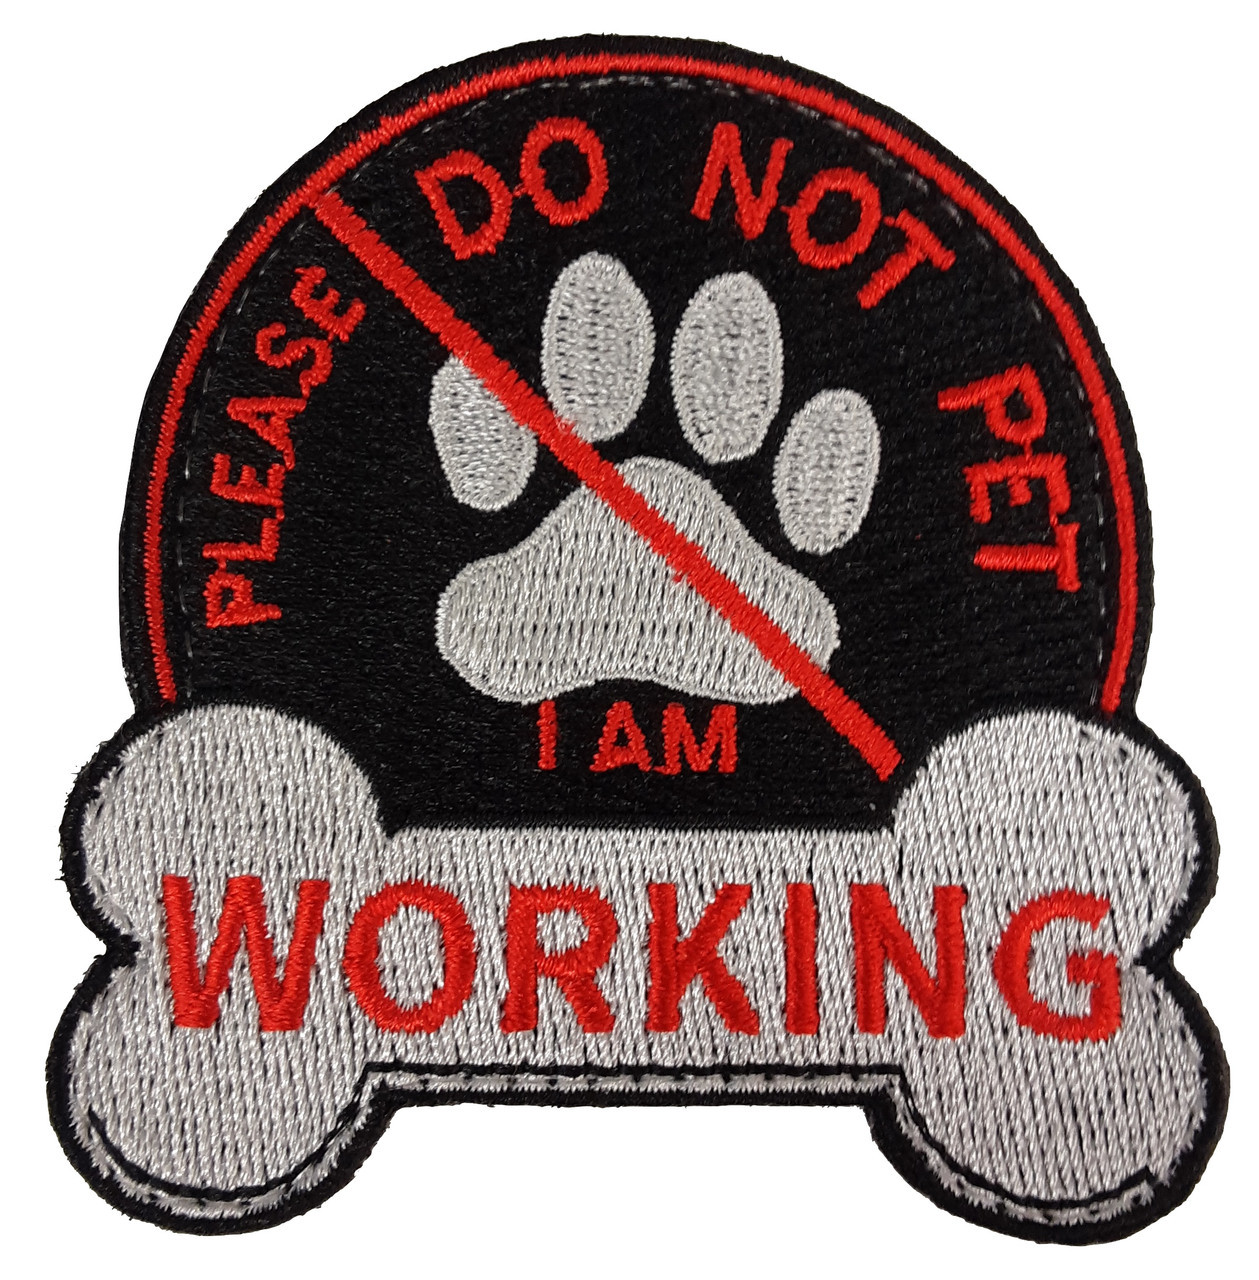 Working Dog Do Not Pet, I'm Working Patch (3-inch Round)